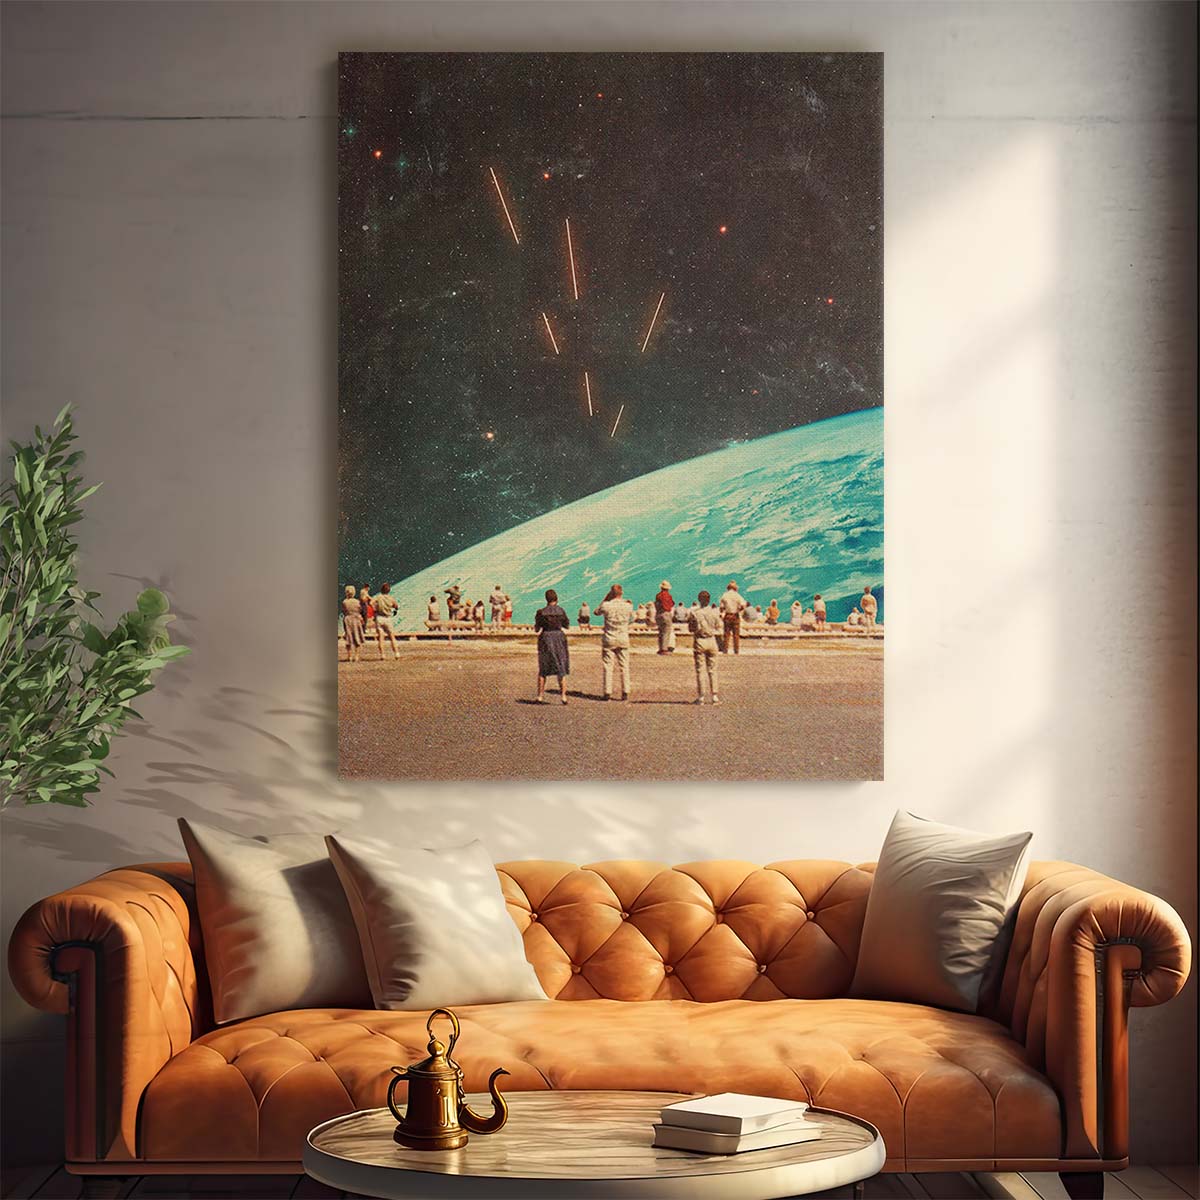 Frank Moth's Surreal Space Travel Digital Collage Art, 'The Others' by Luxuriance Designs, made in USA